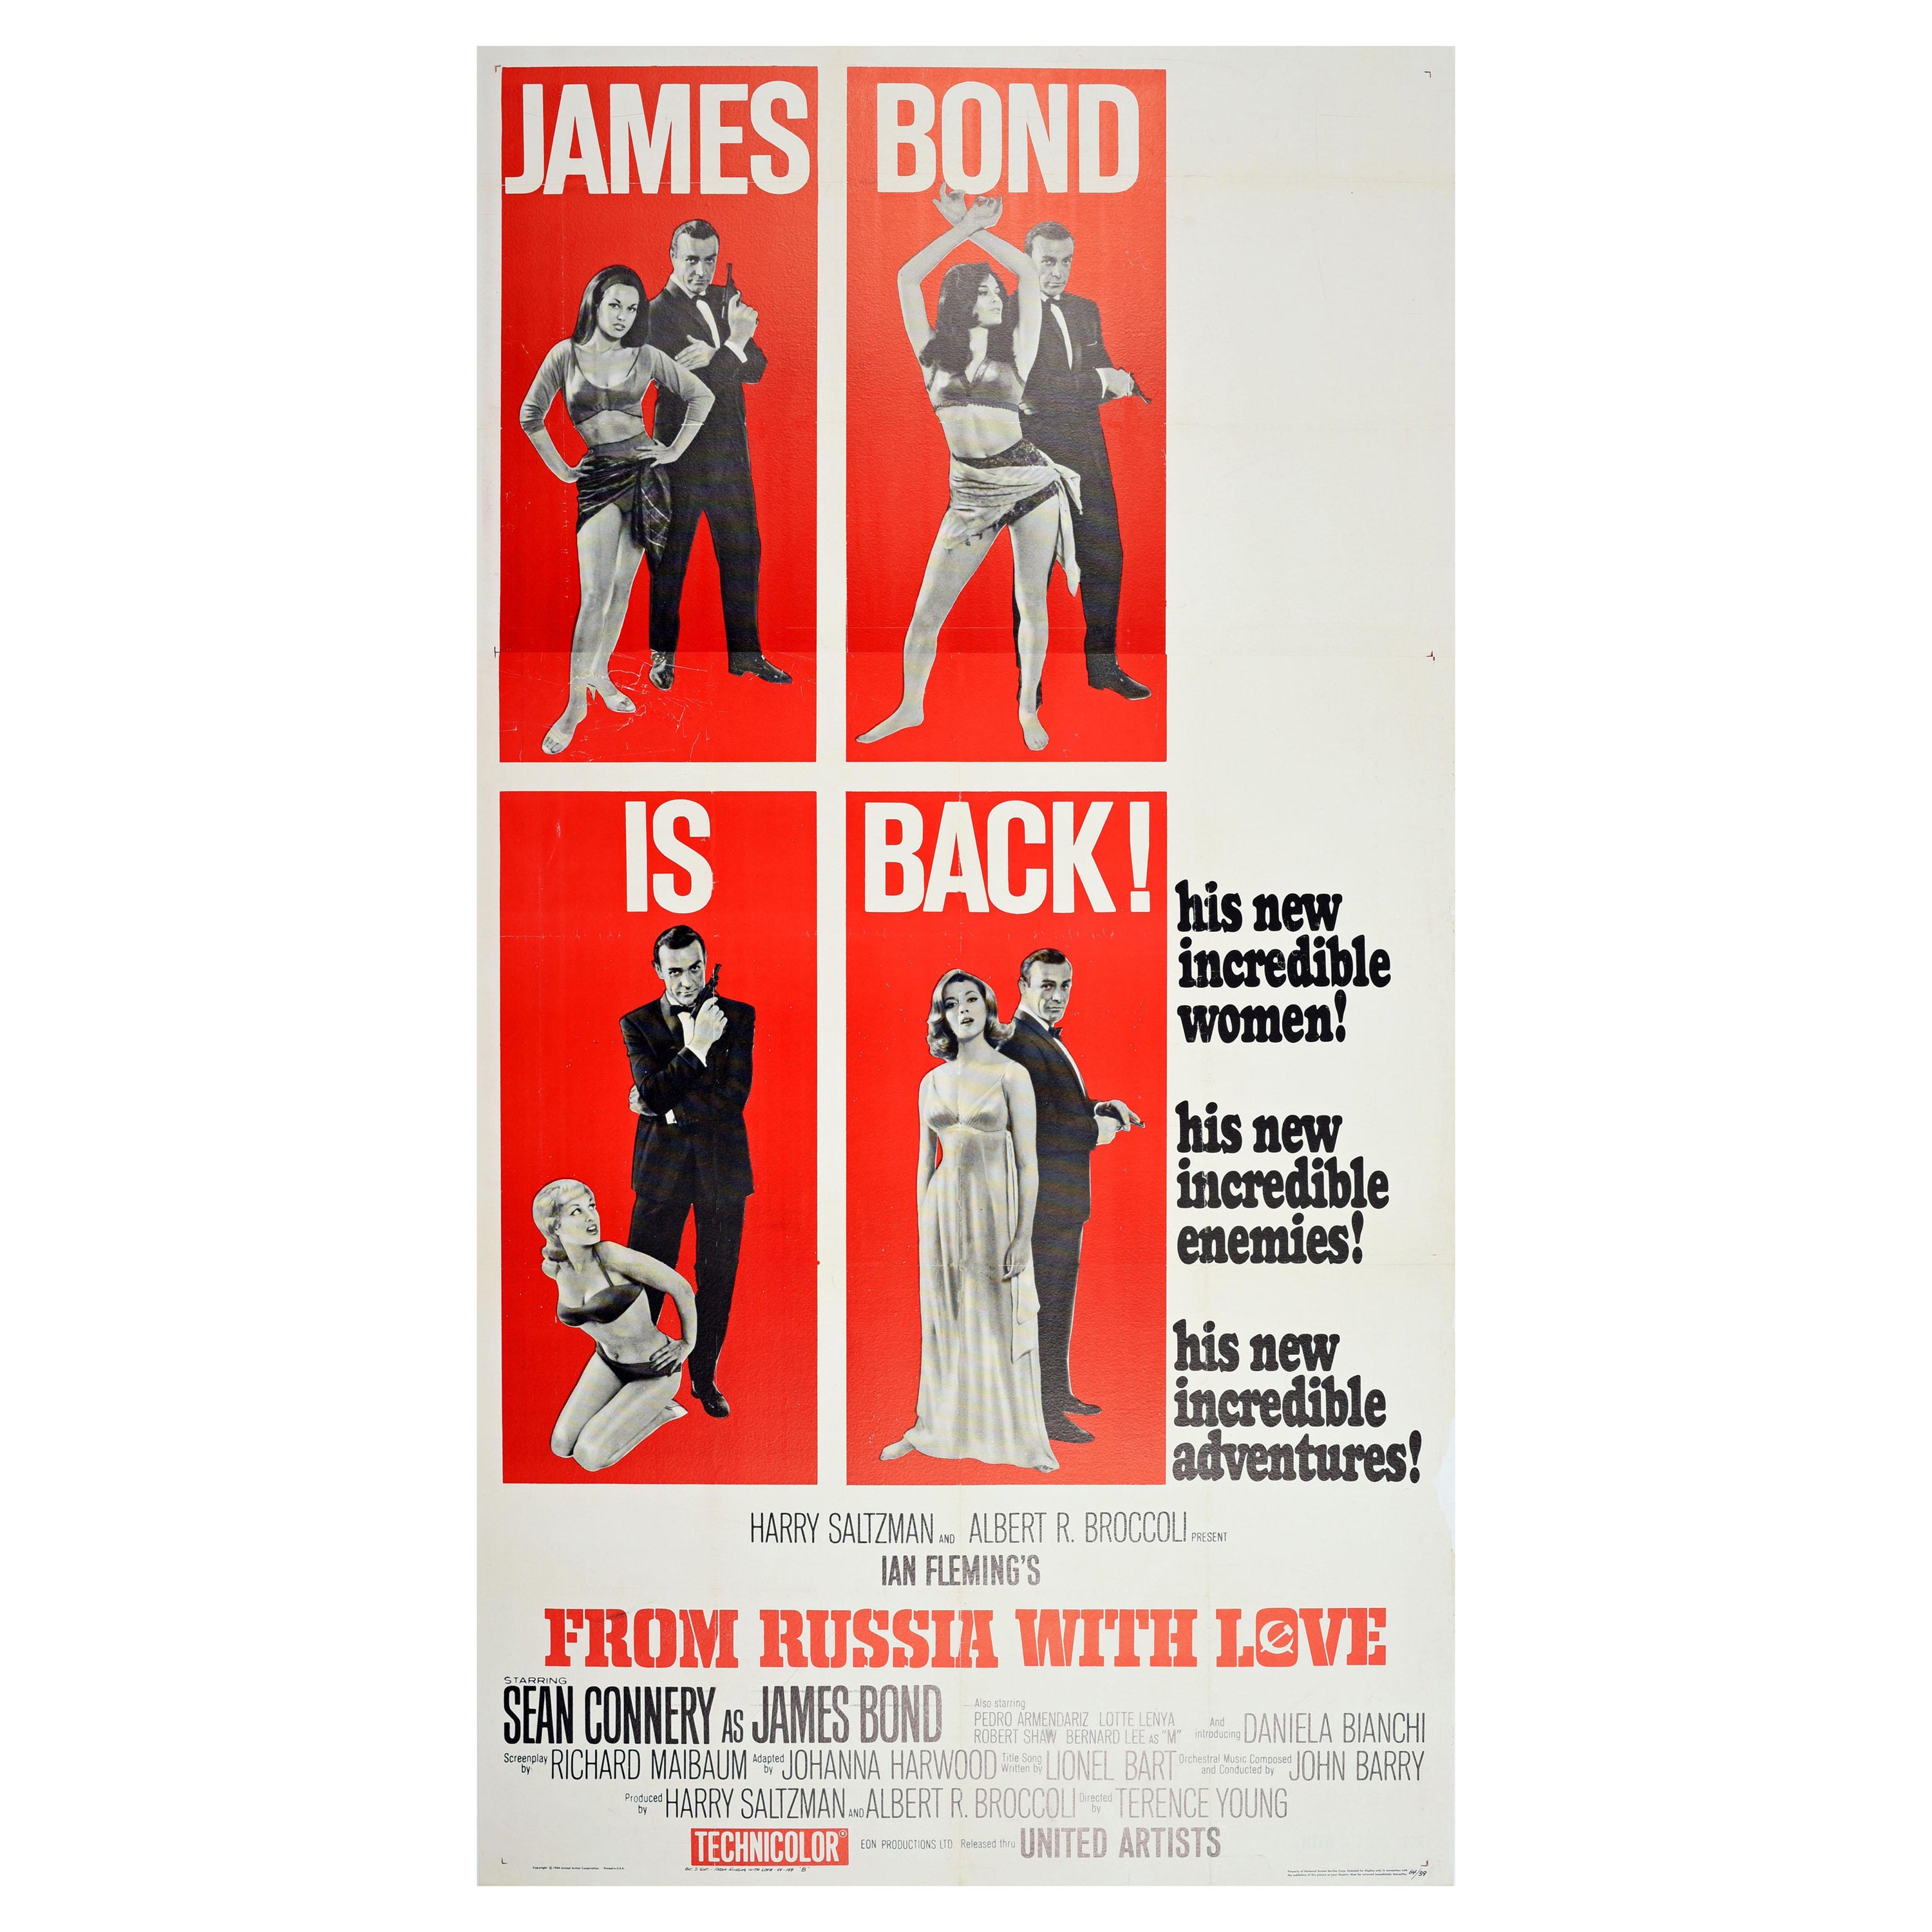 Original Vintage James Bond Poster From Russia With Love Sean Connery 007 Film For Sale